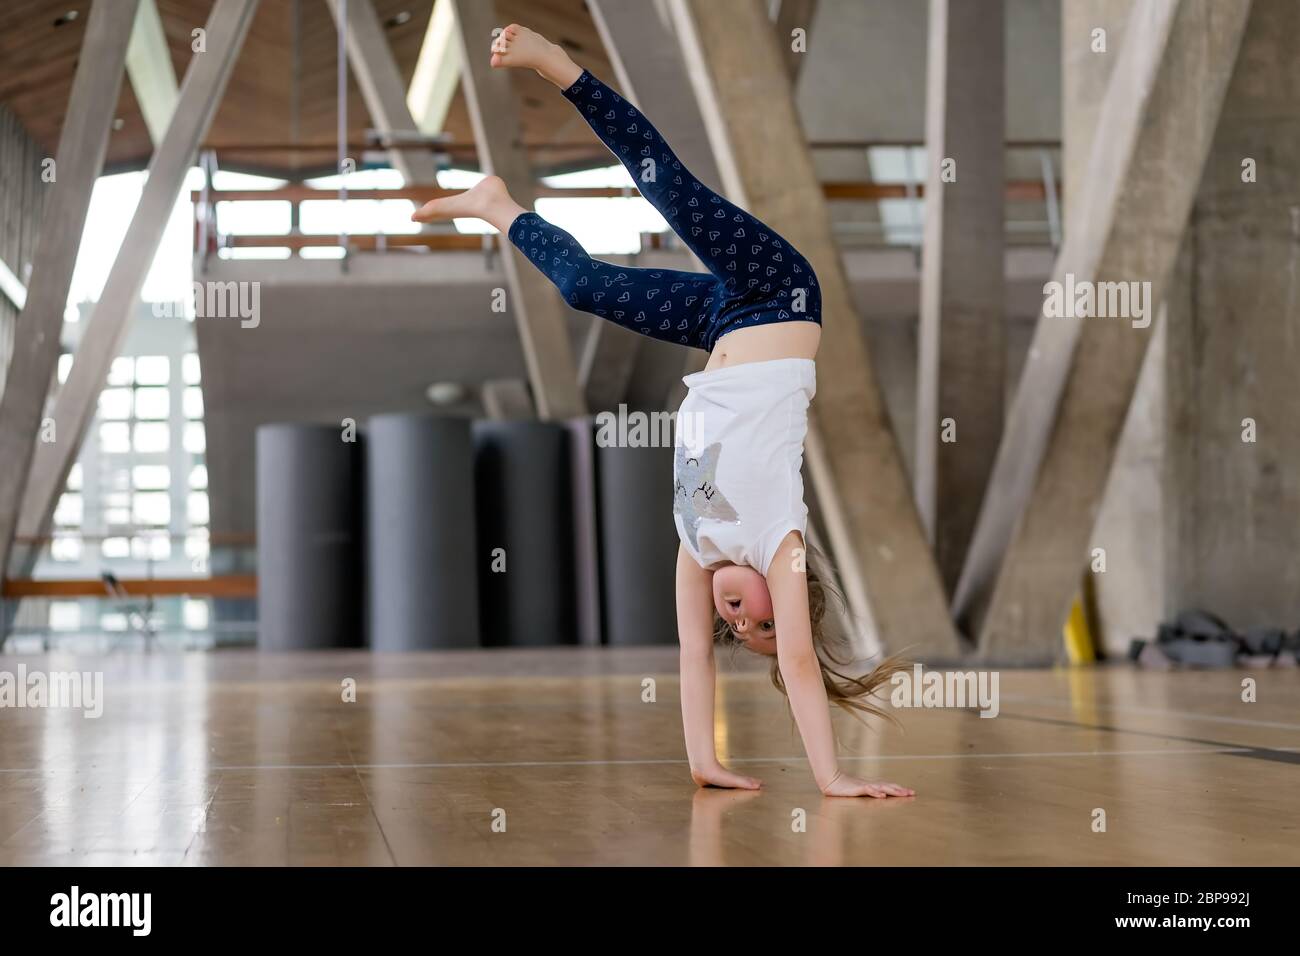 Young Caucasian girl doing cartwheel on the floor in an indoor sports centre Stock Photo